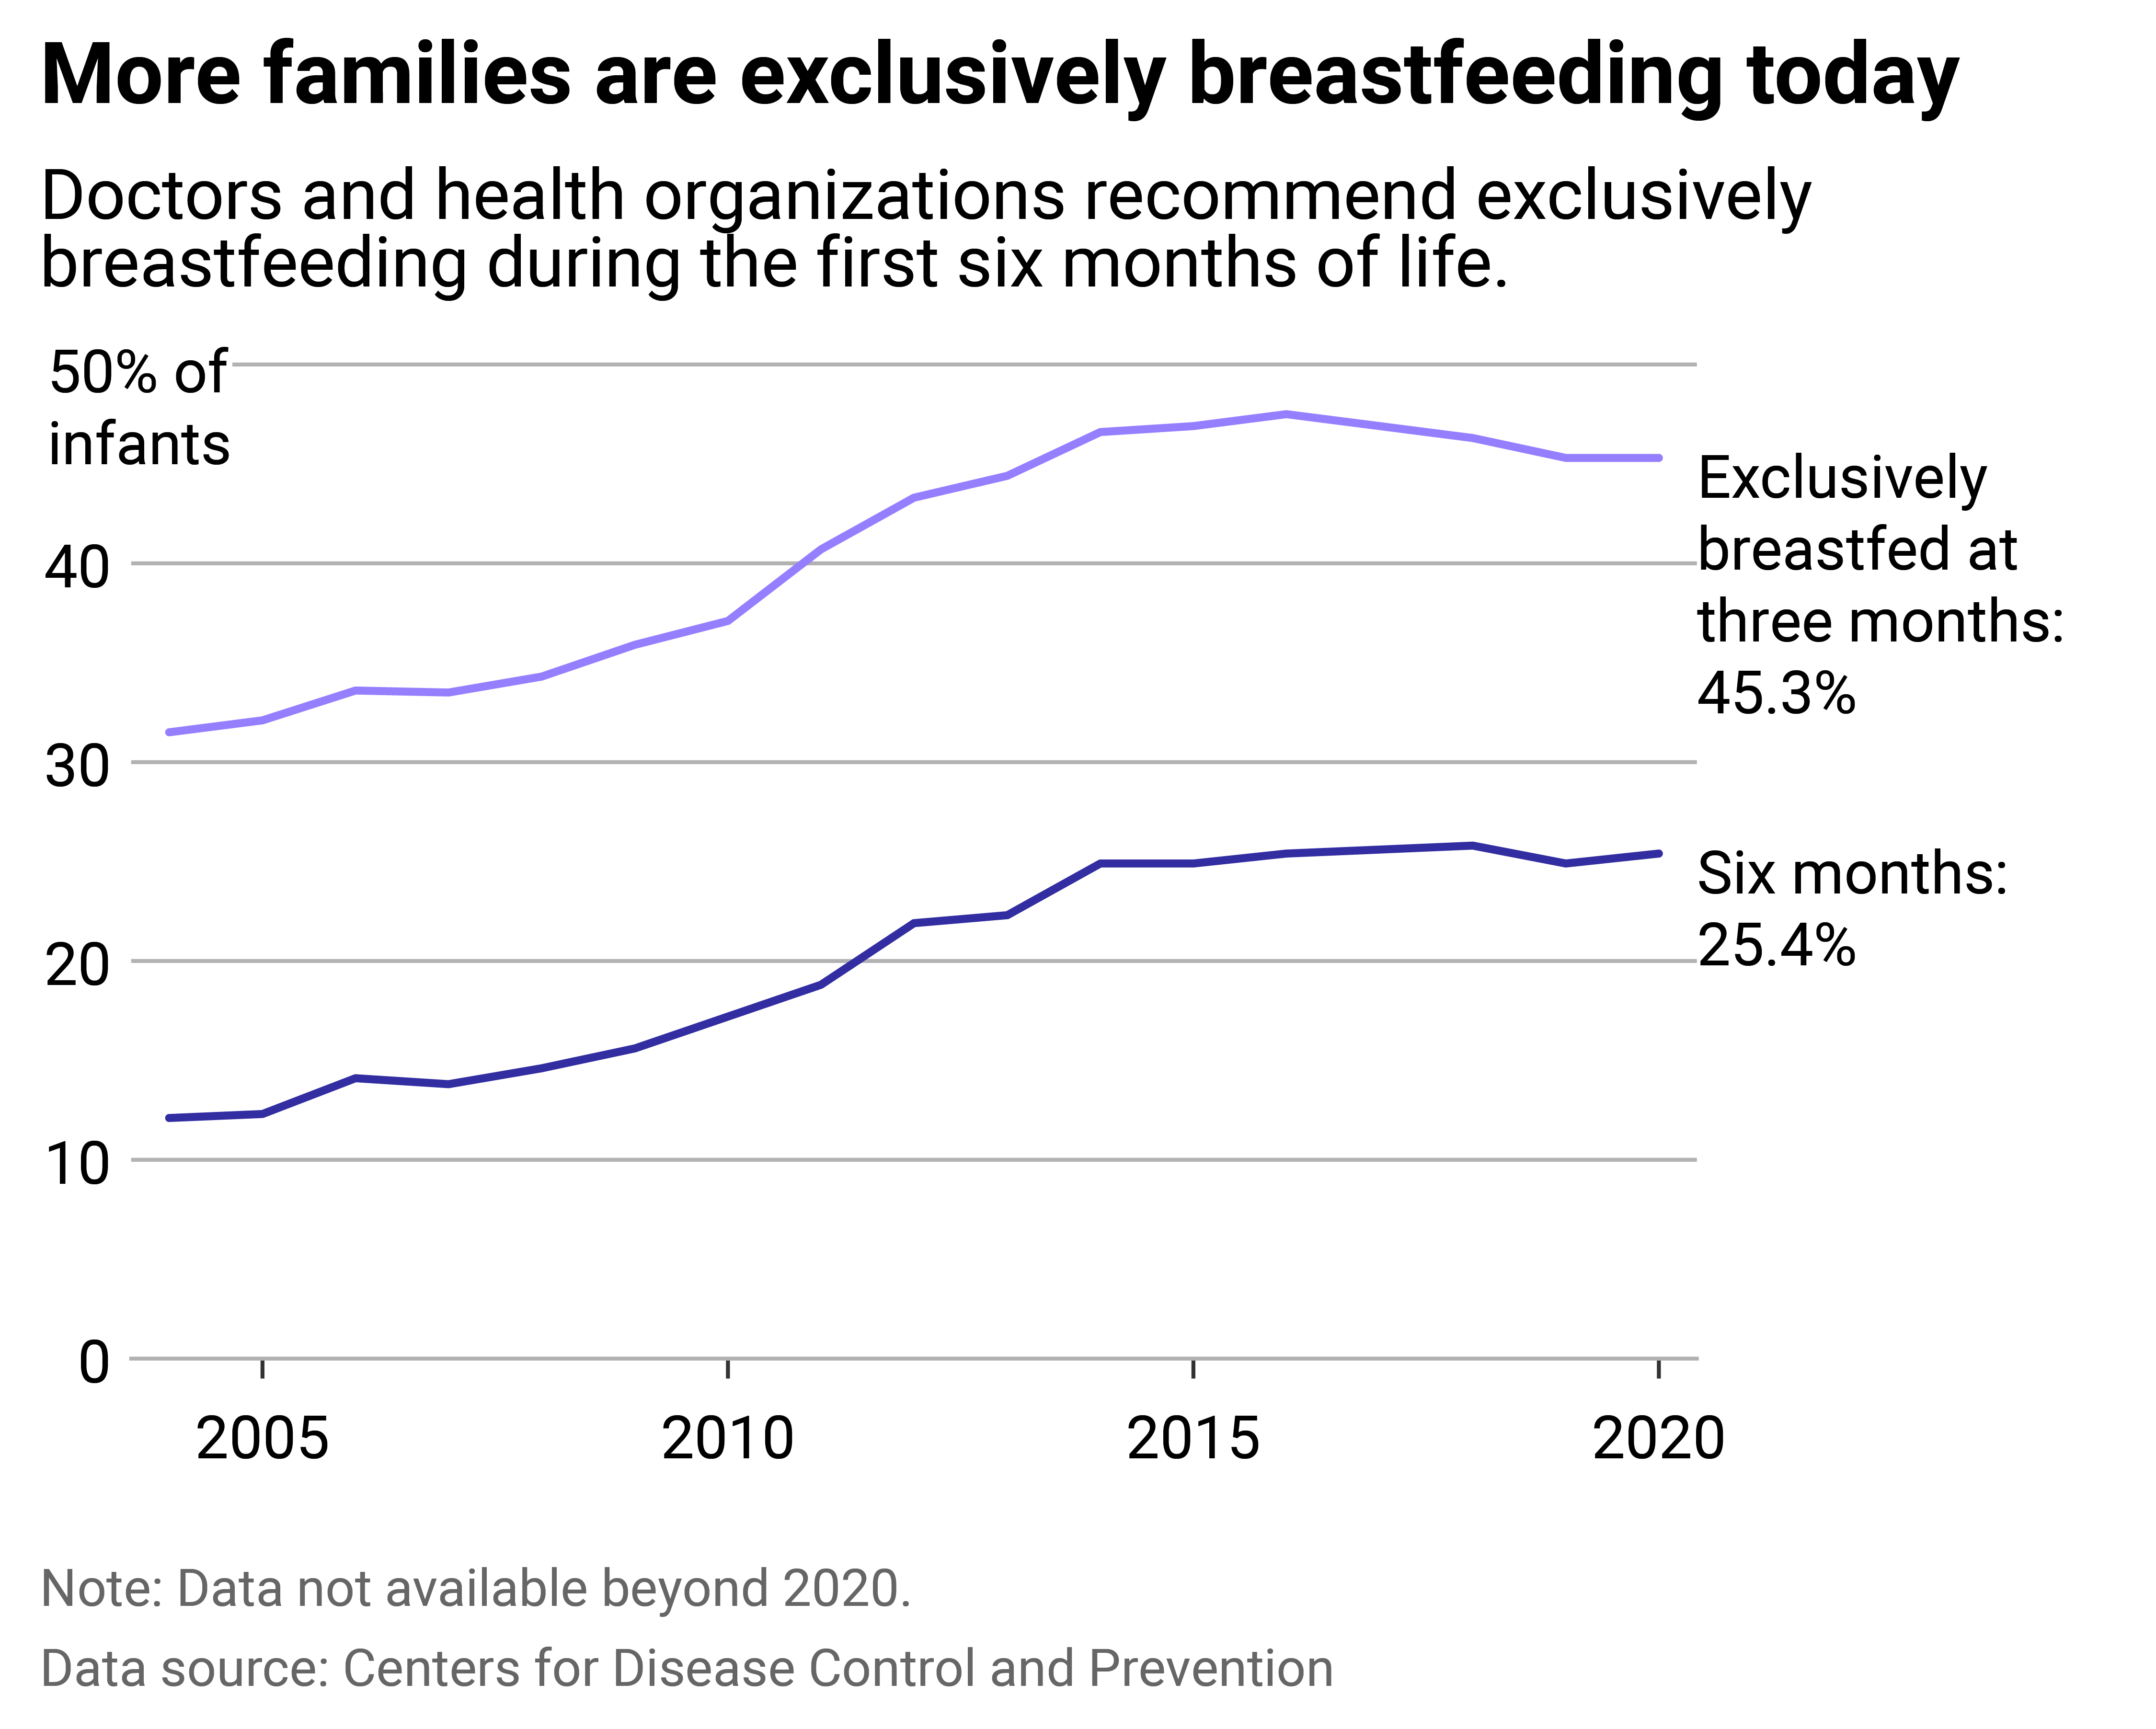 Line chart showing more families are exclusively breastfeeding today than 15 years ago. Doctors and health organizations recommend exclusively breastfeeding during the first six months of life. In 2020, 45.3% of infants were exclusively breastfed at three months, while 25.4% of six-month infants were exclusively breastfed.